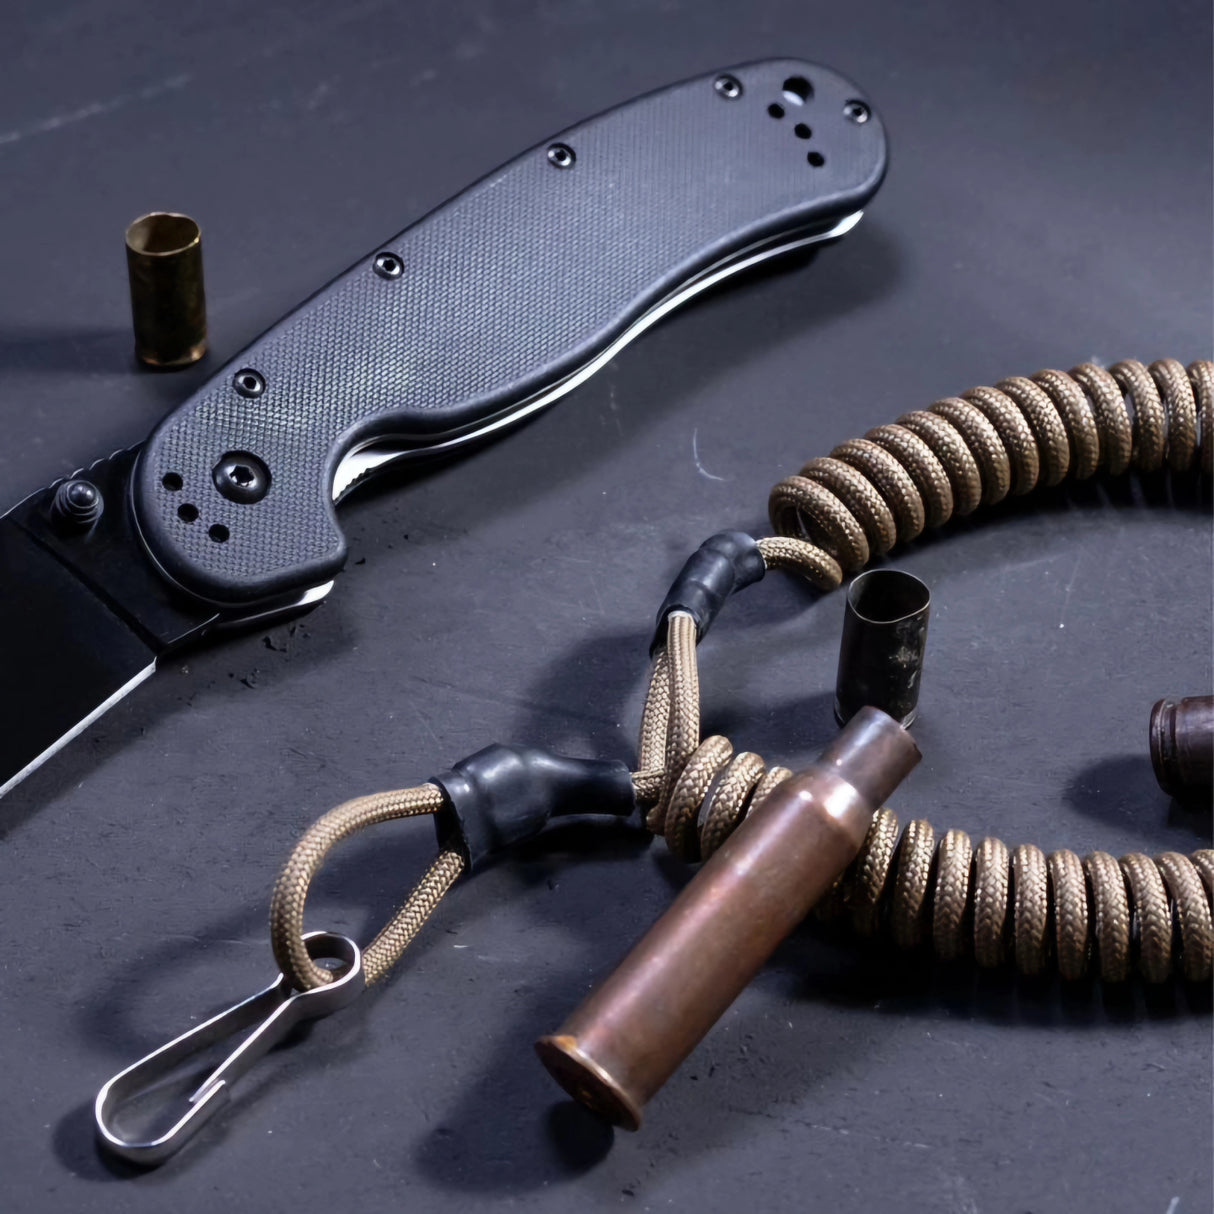 Spiral lanyard Weapon and Gear Retention